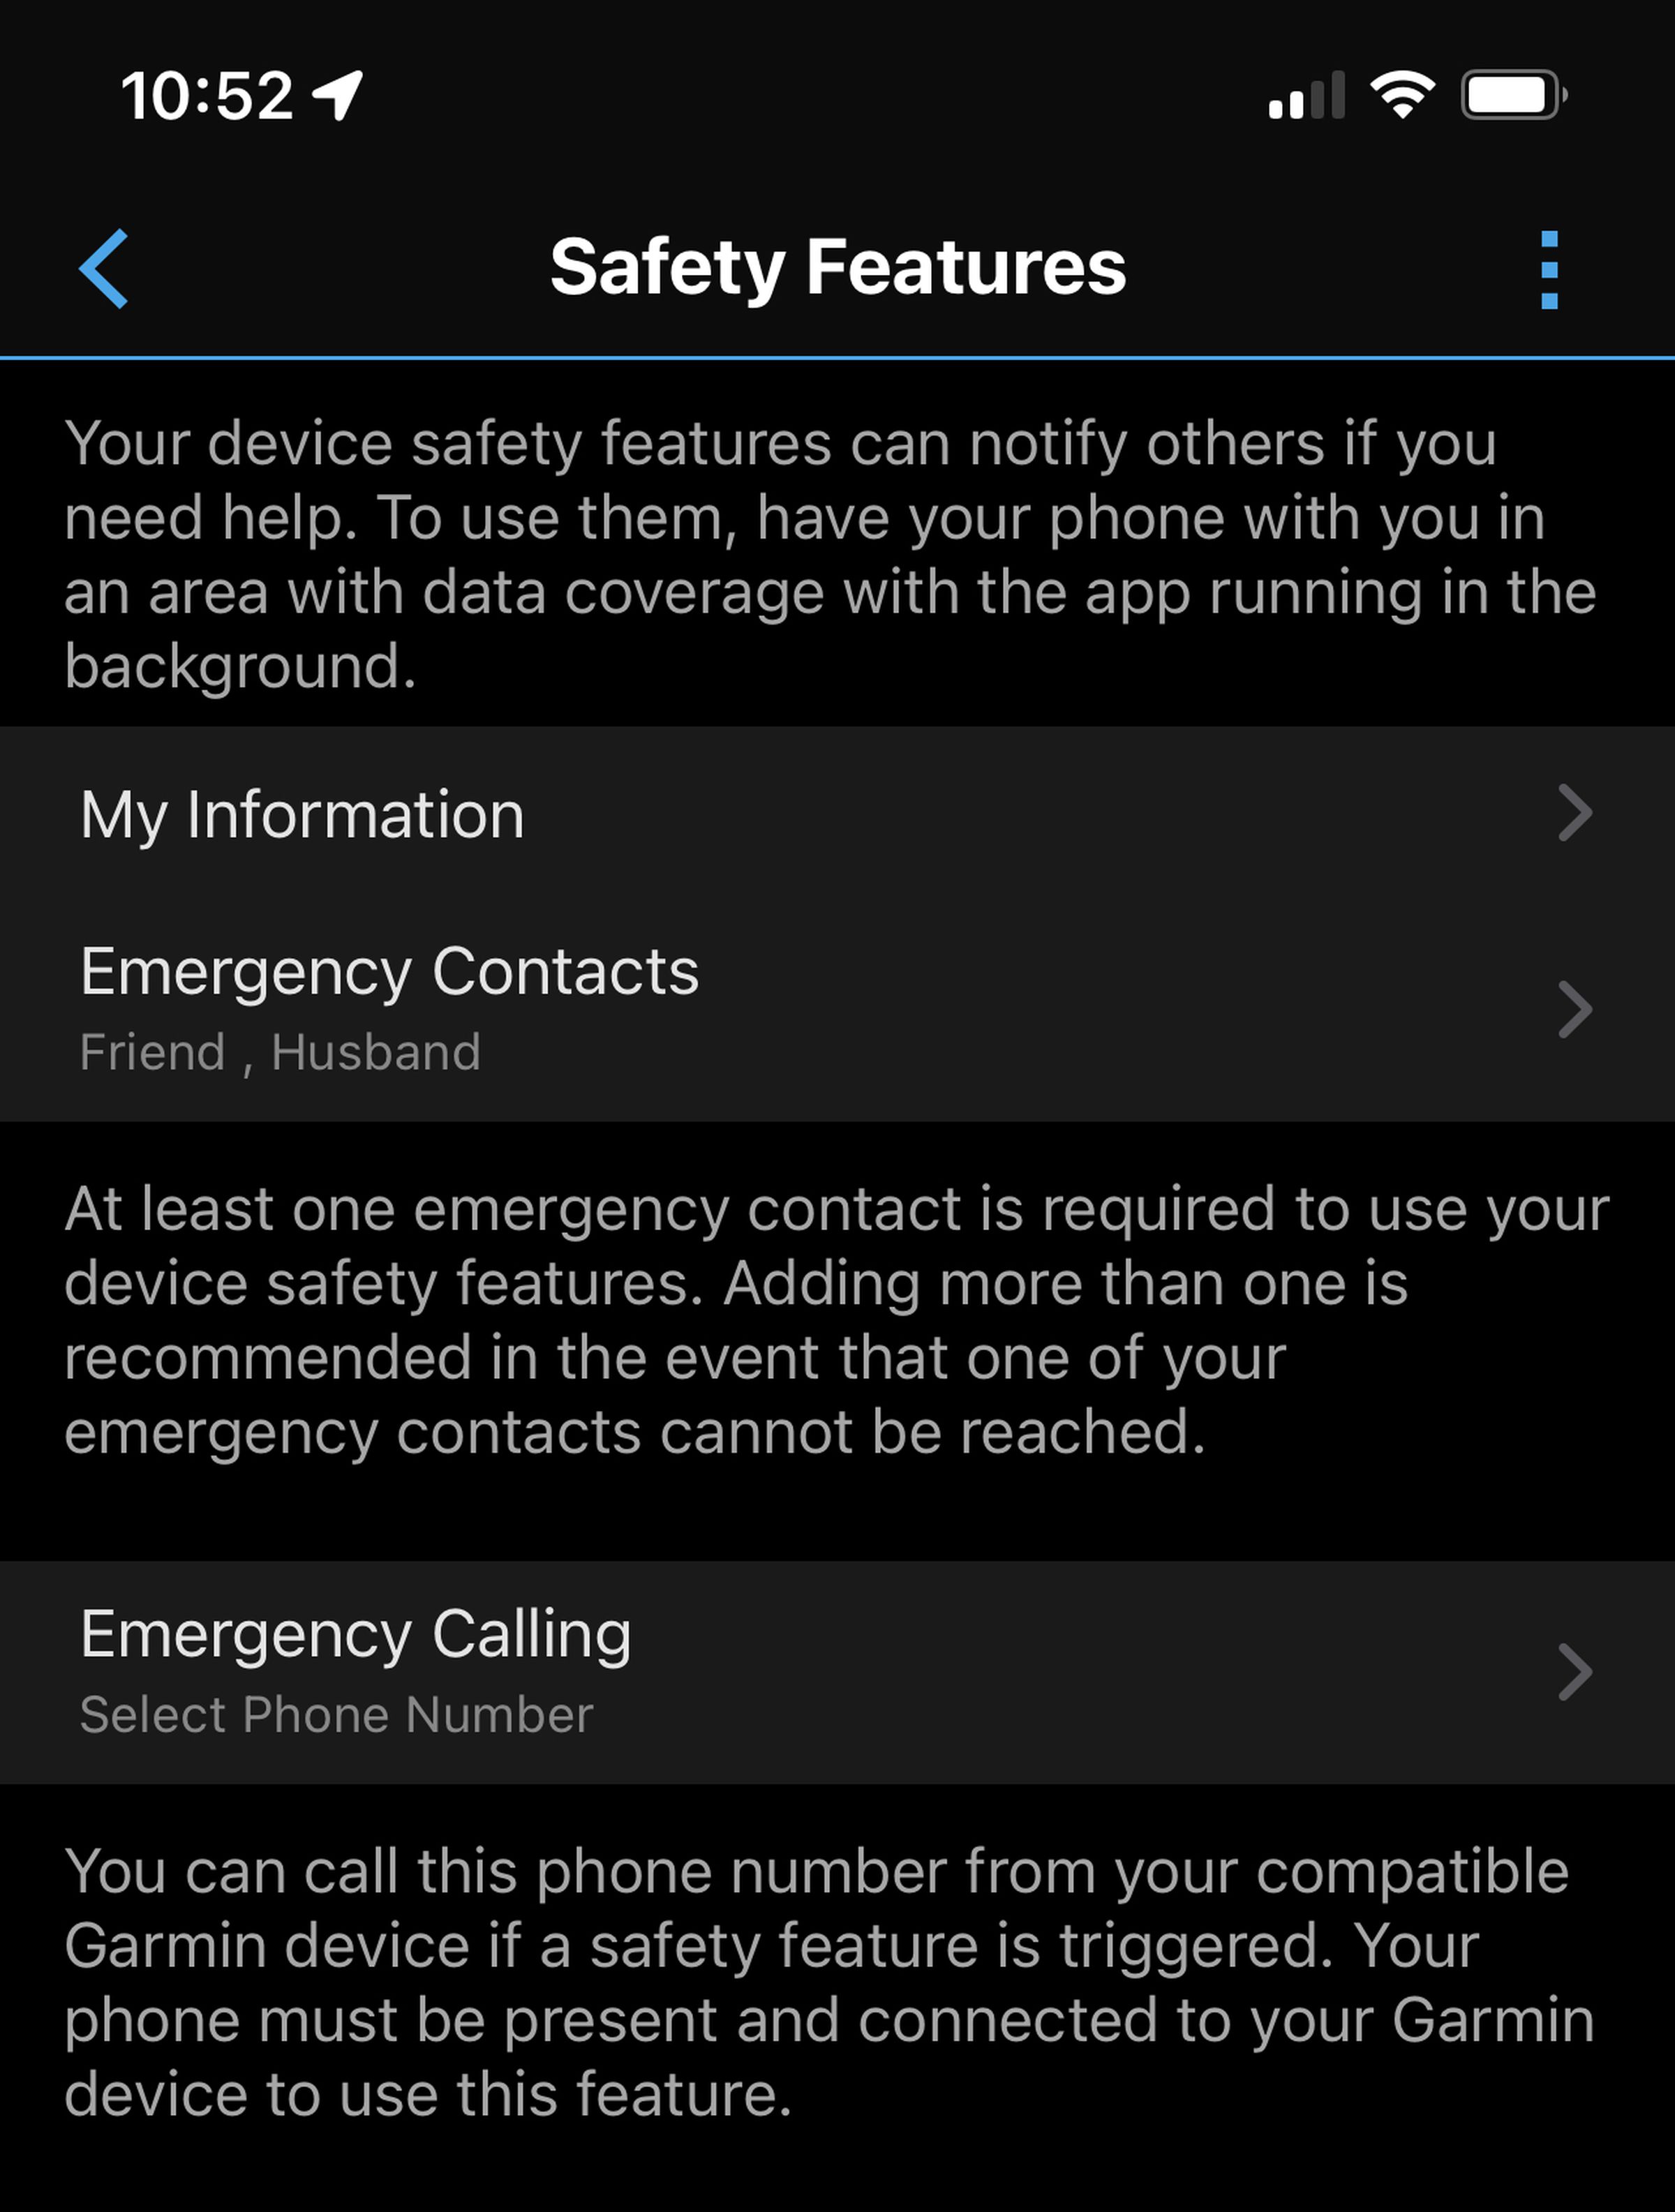 The Safety Features menu in the Garmin Connect app.